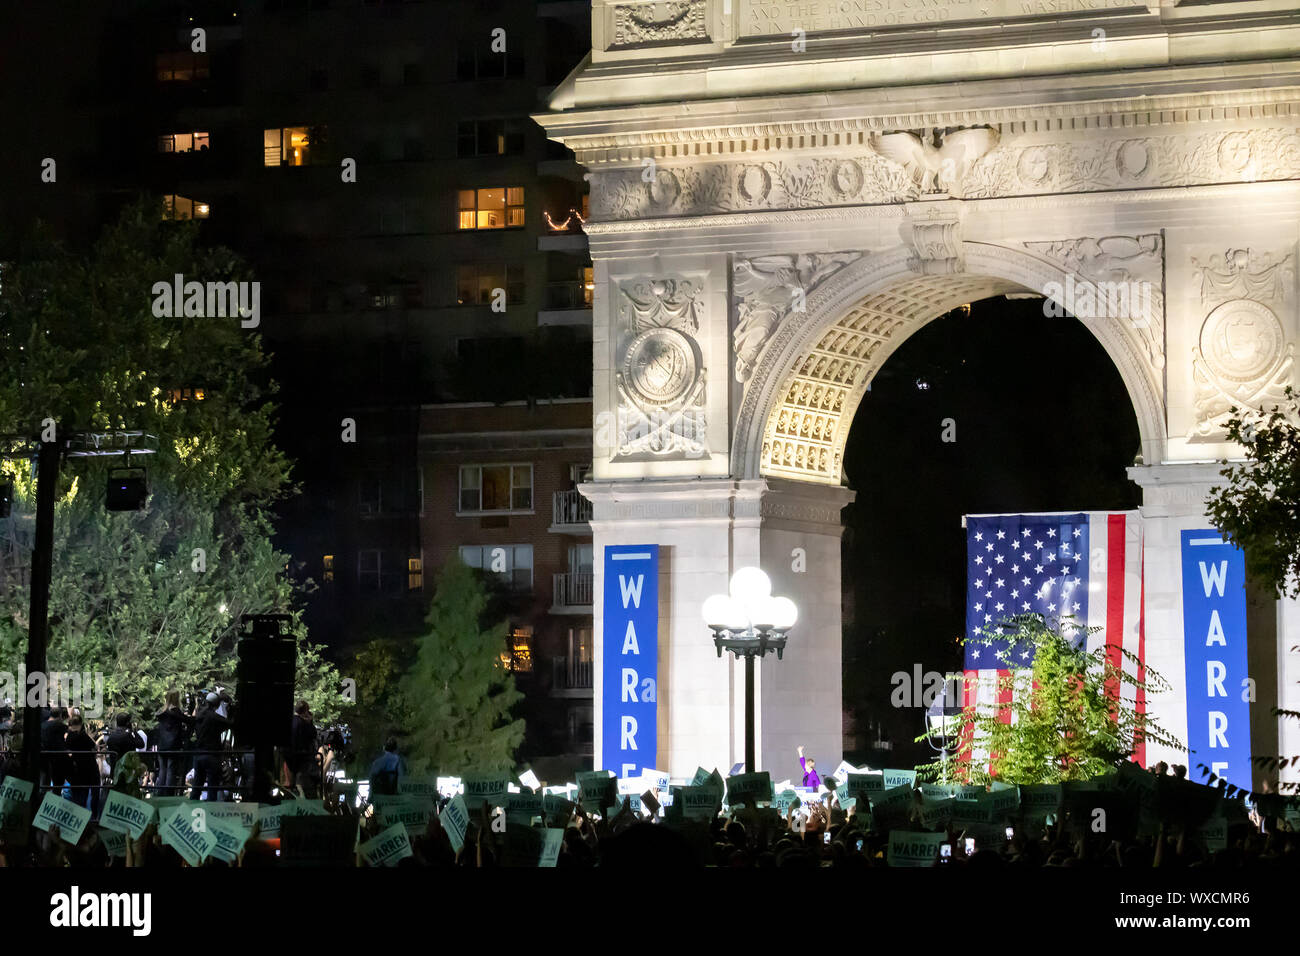 NEW YORK CITY September 2019: Senator Elizabeth Warren speaks to a crowd of people at a presidential campaign rally in Washington Square Park. Stock Photo